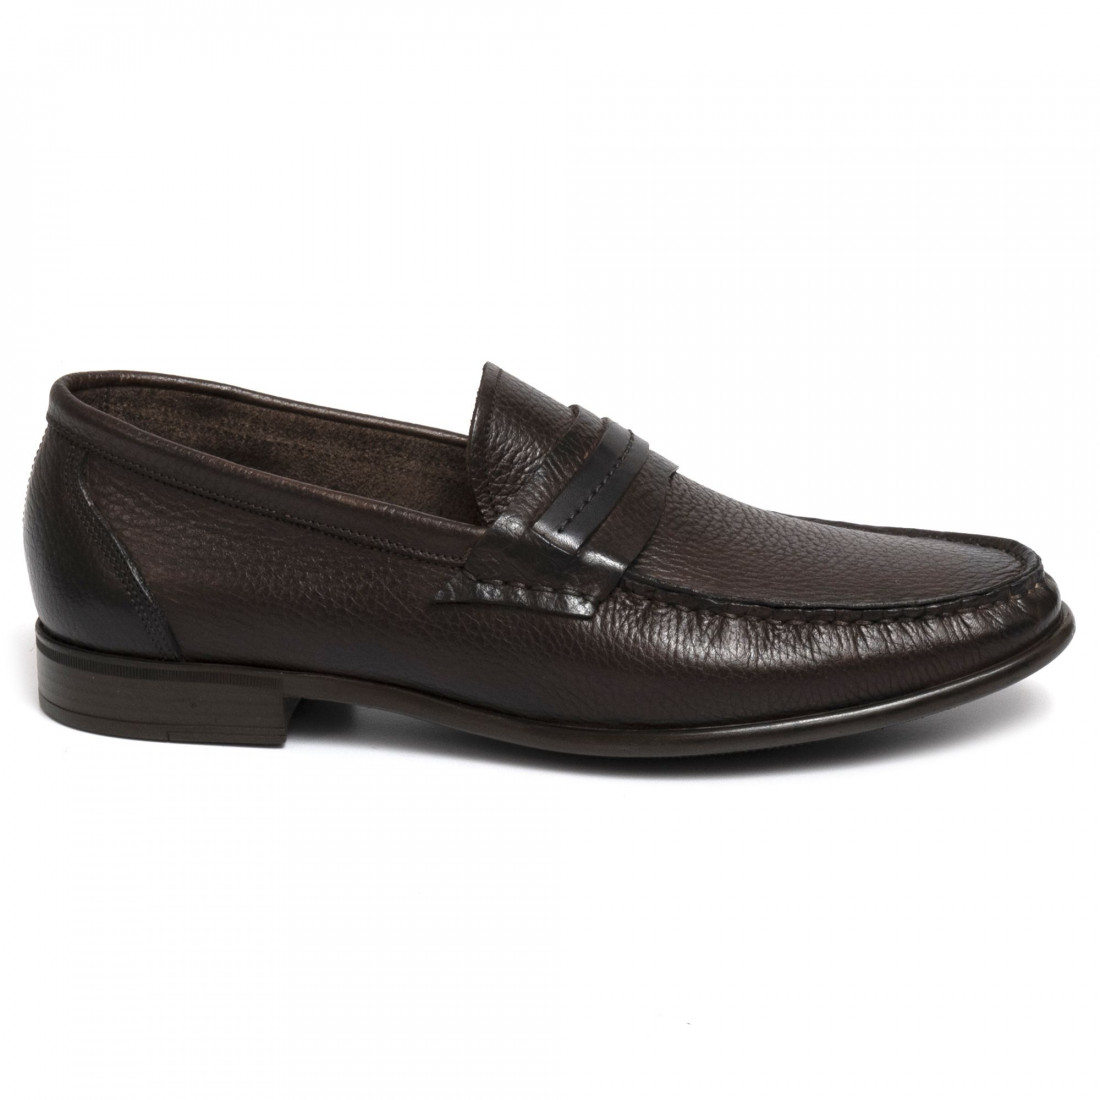 Brown John White men's loafers in unlined leather